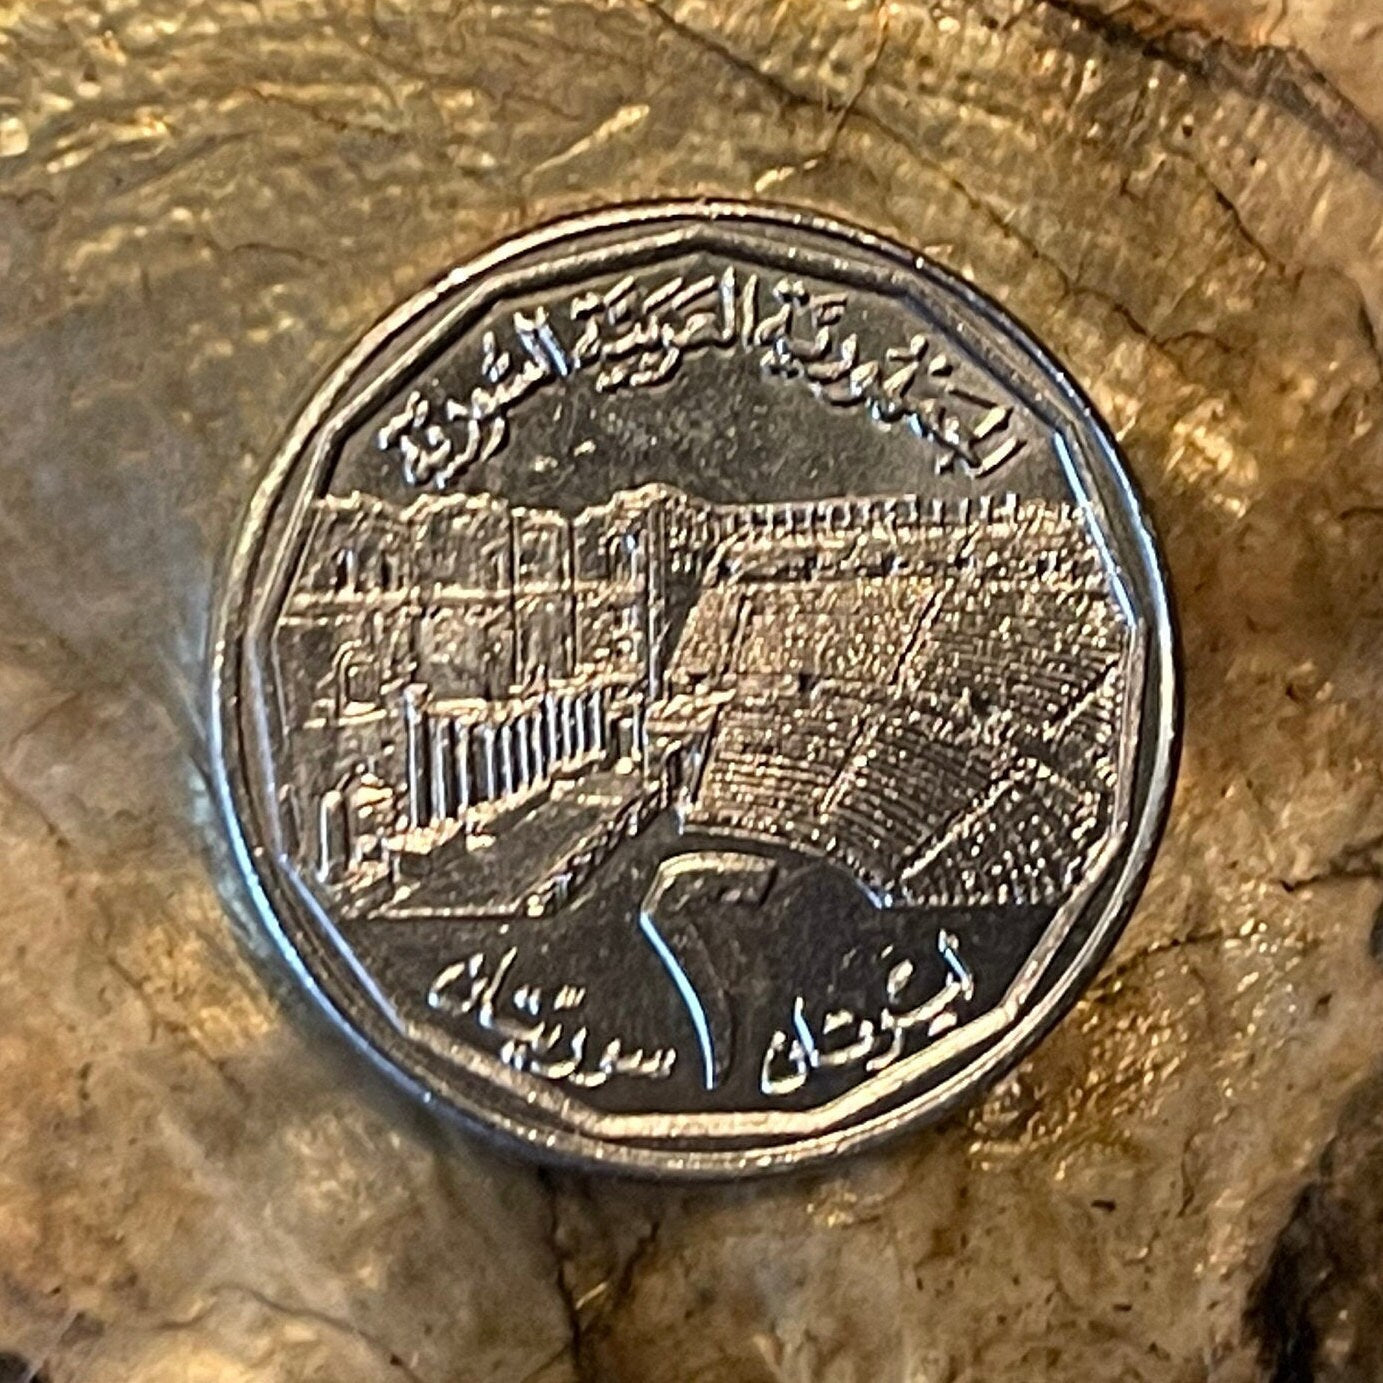 Roman Gladiator Theatre w/15,000 Seats at Bosra & Hawk of Quraish 2 Lira Syria Authentic Coin Charm for Jewelry and Craft Making